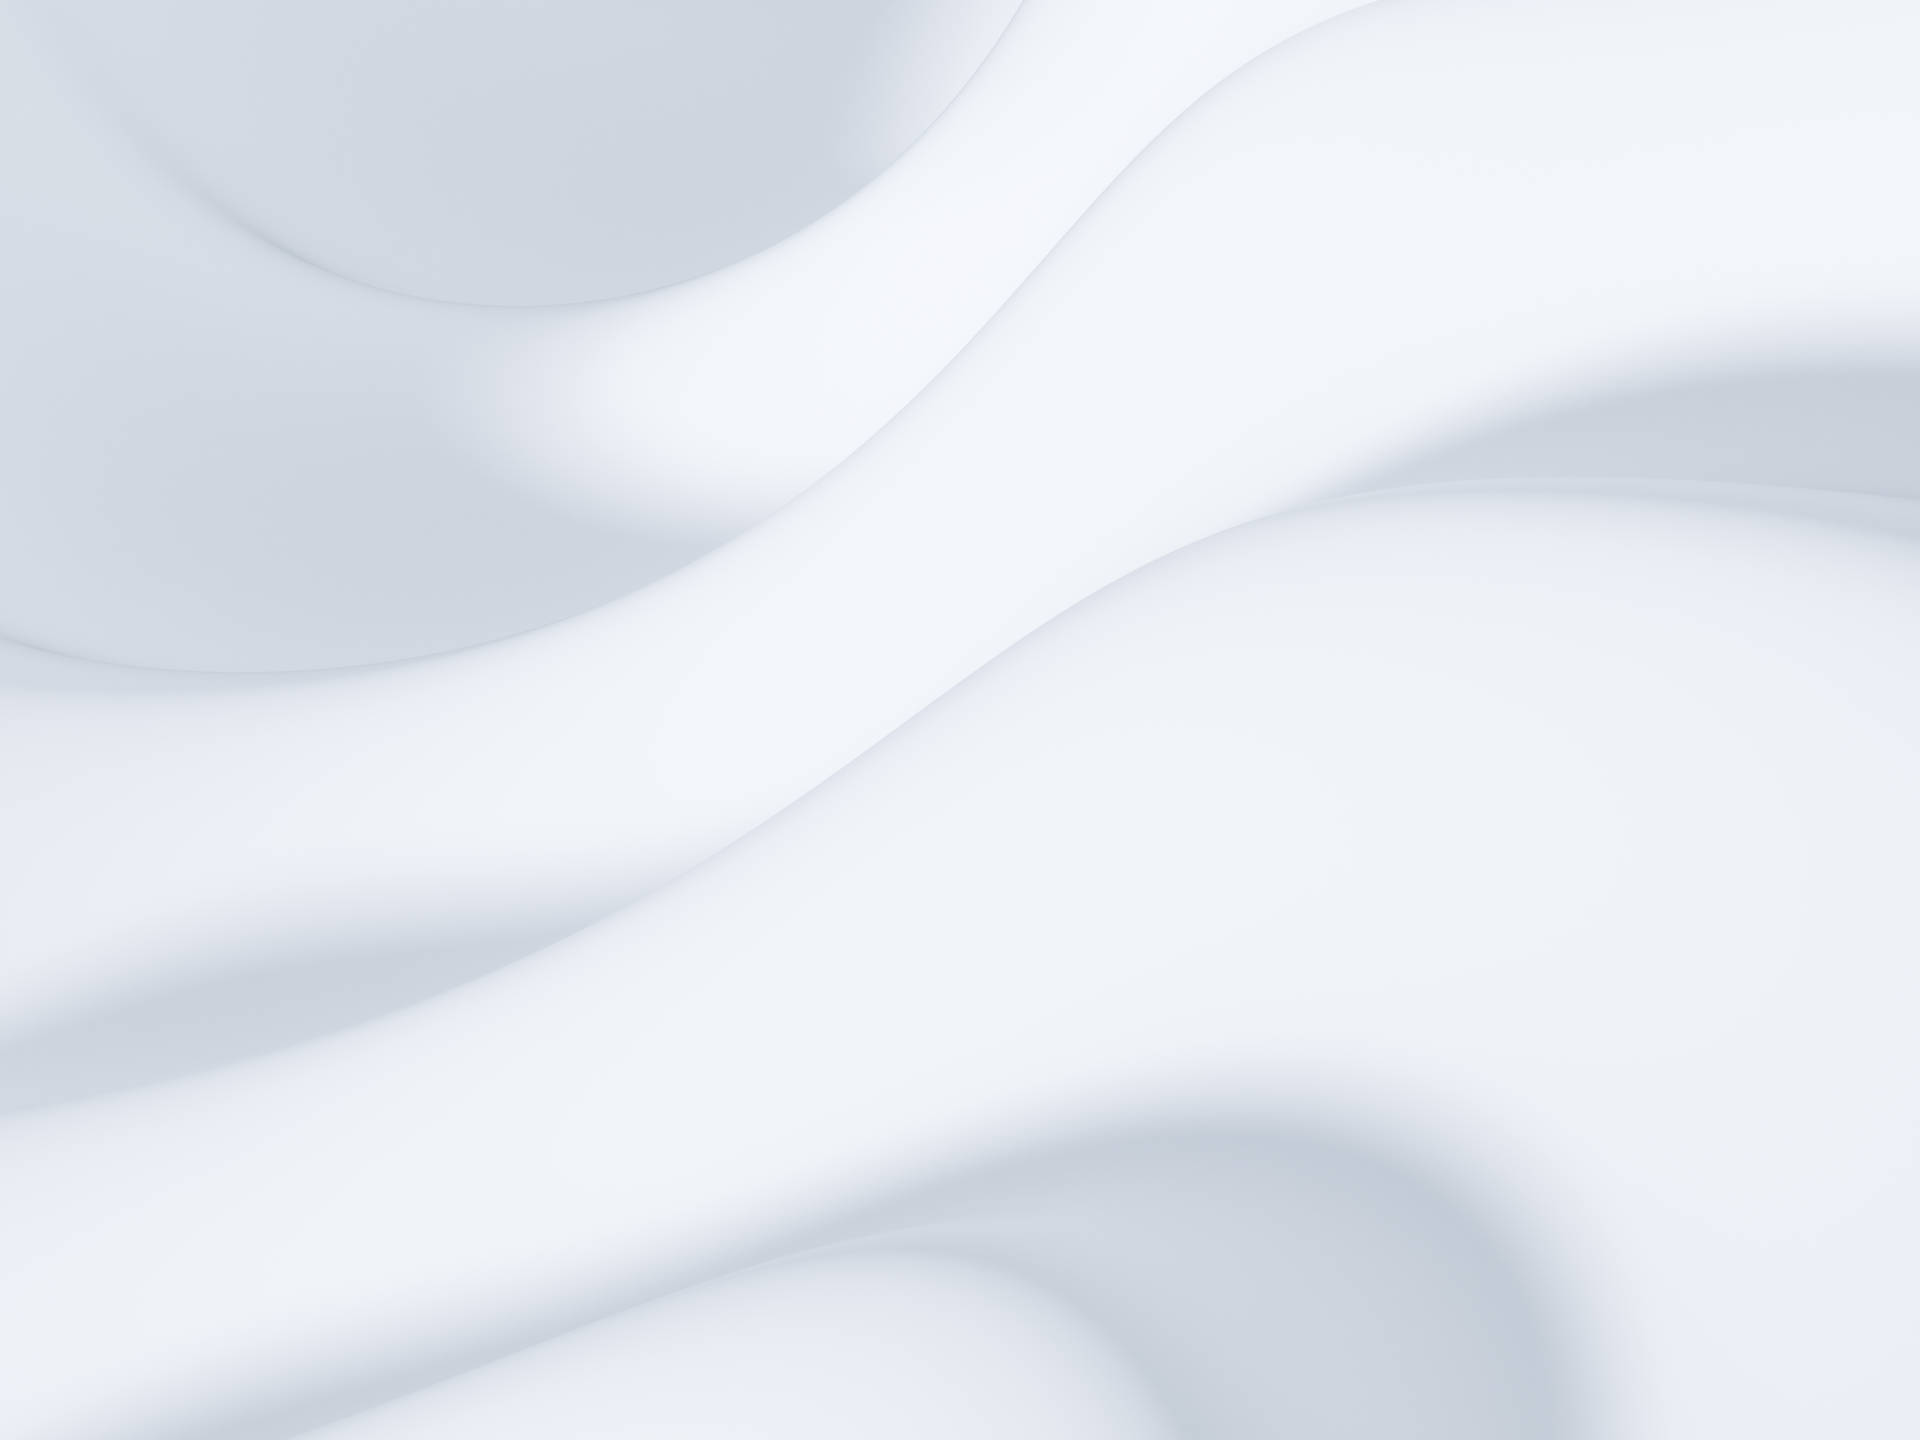 4k White Abstract Waves Picture